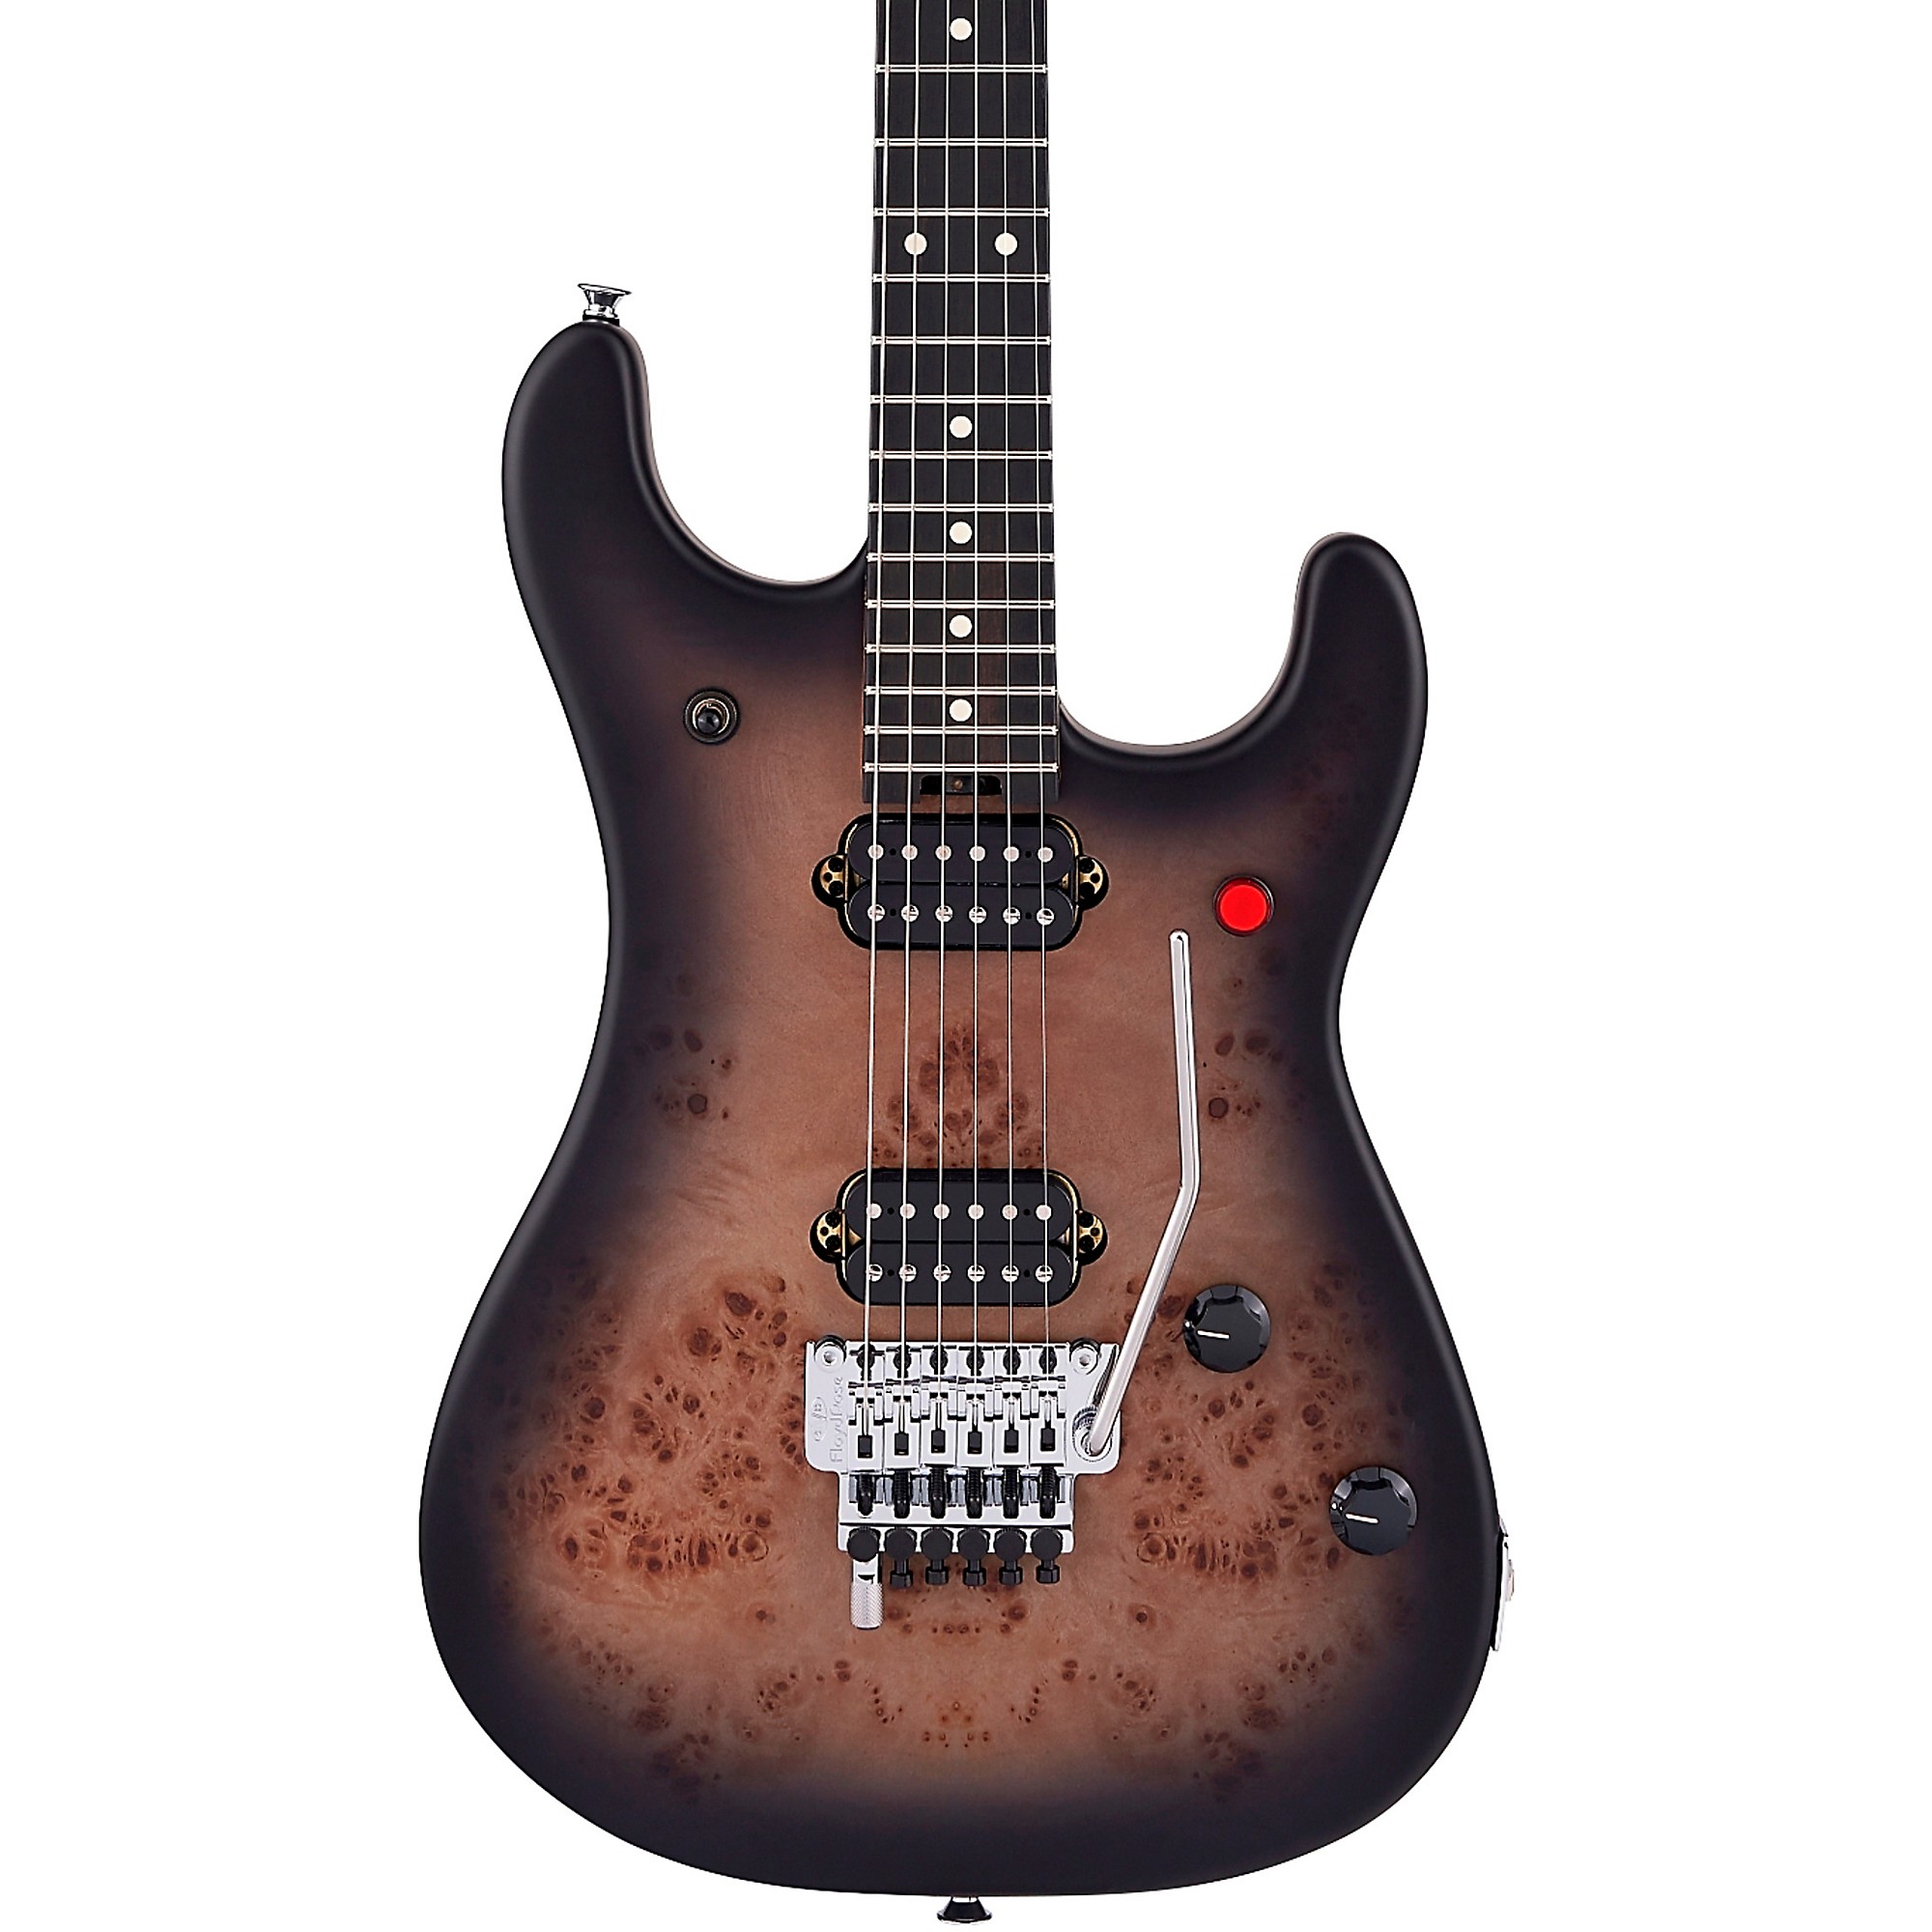 Электрогитара EVH 5150 Deluxe Poplar Burl Black Burst электрогитара evh limited edition 5150 deluxe ash natural